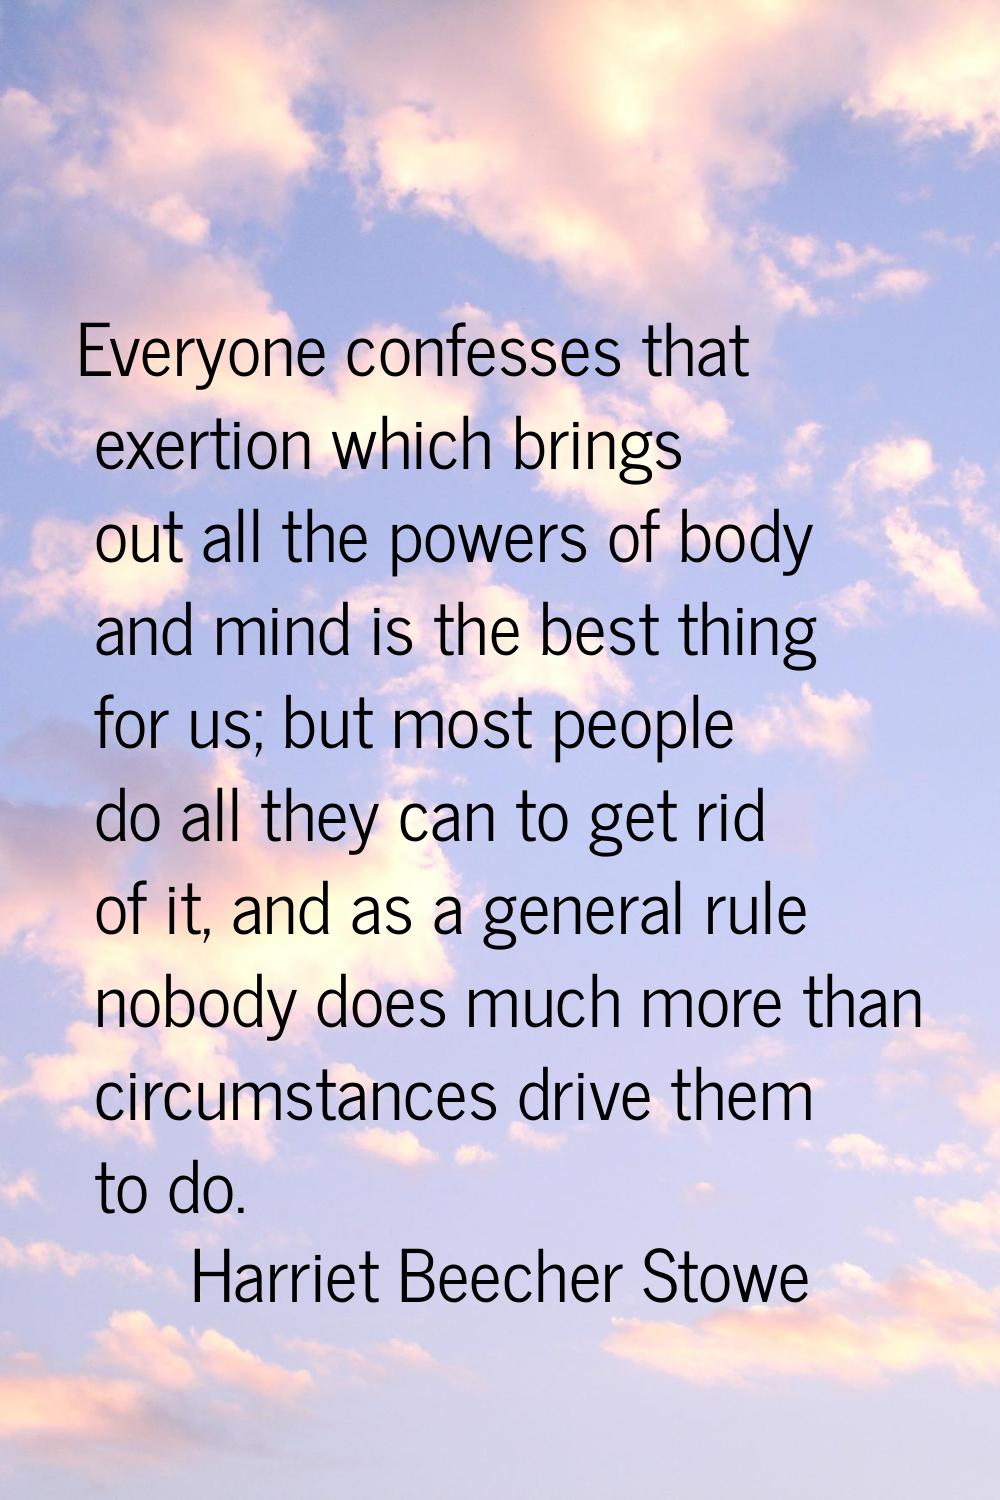 Everyone confesses that exertion which brings out all the powers of body and mind is the best thing